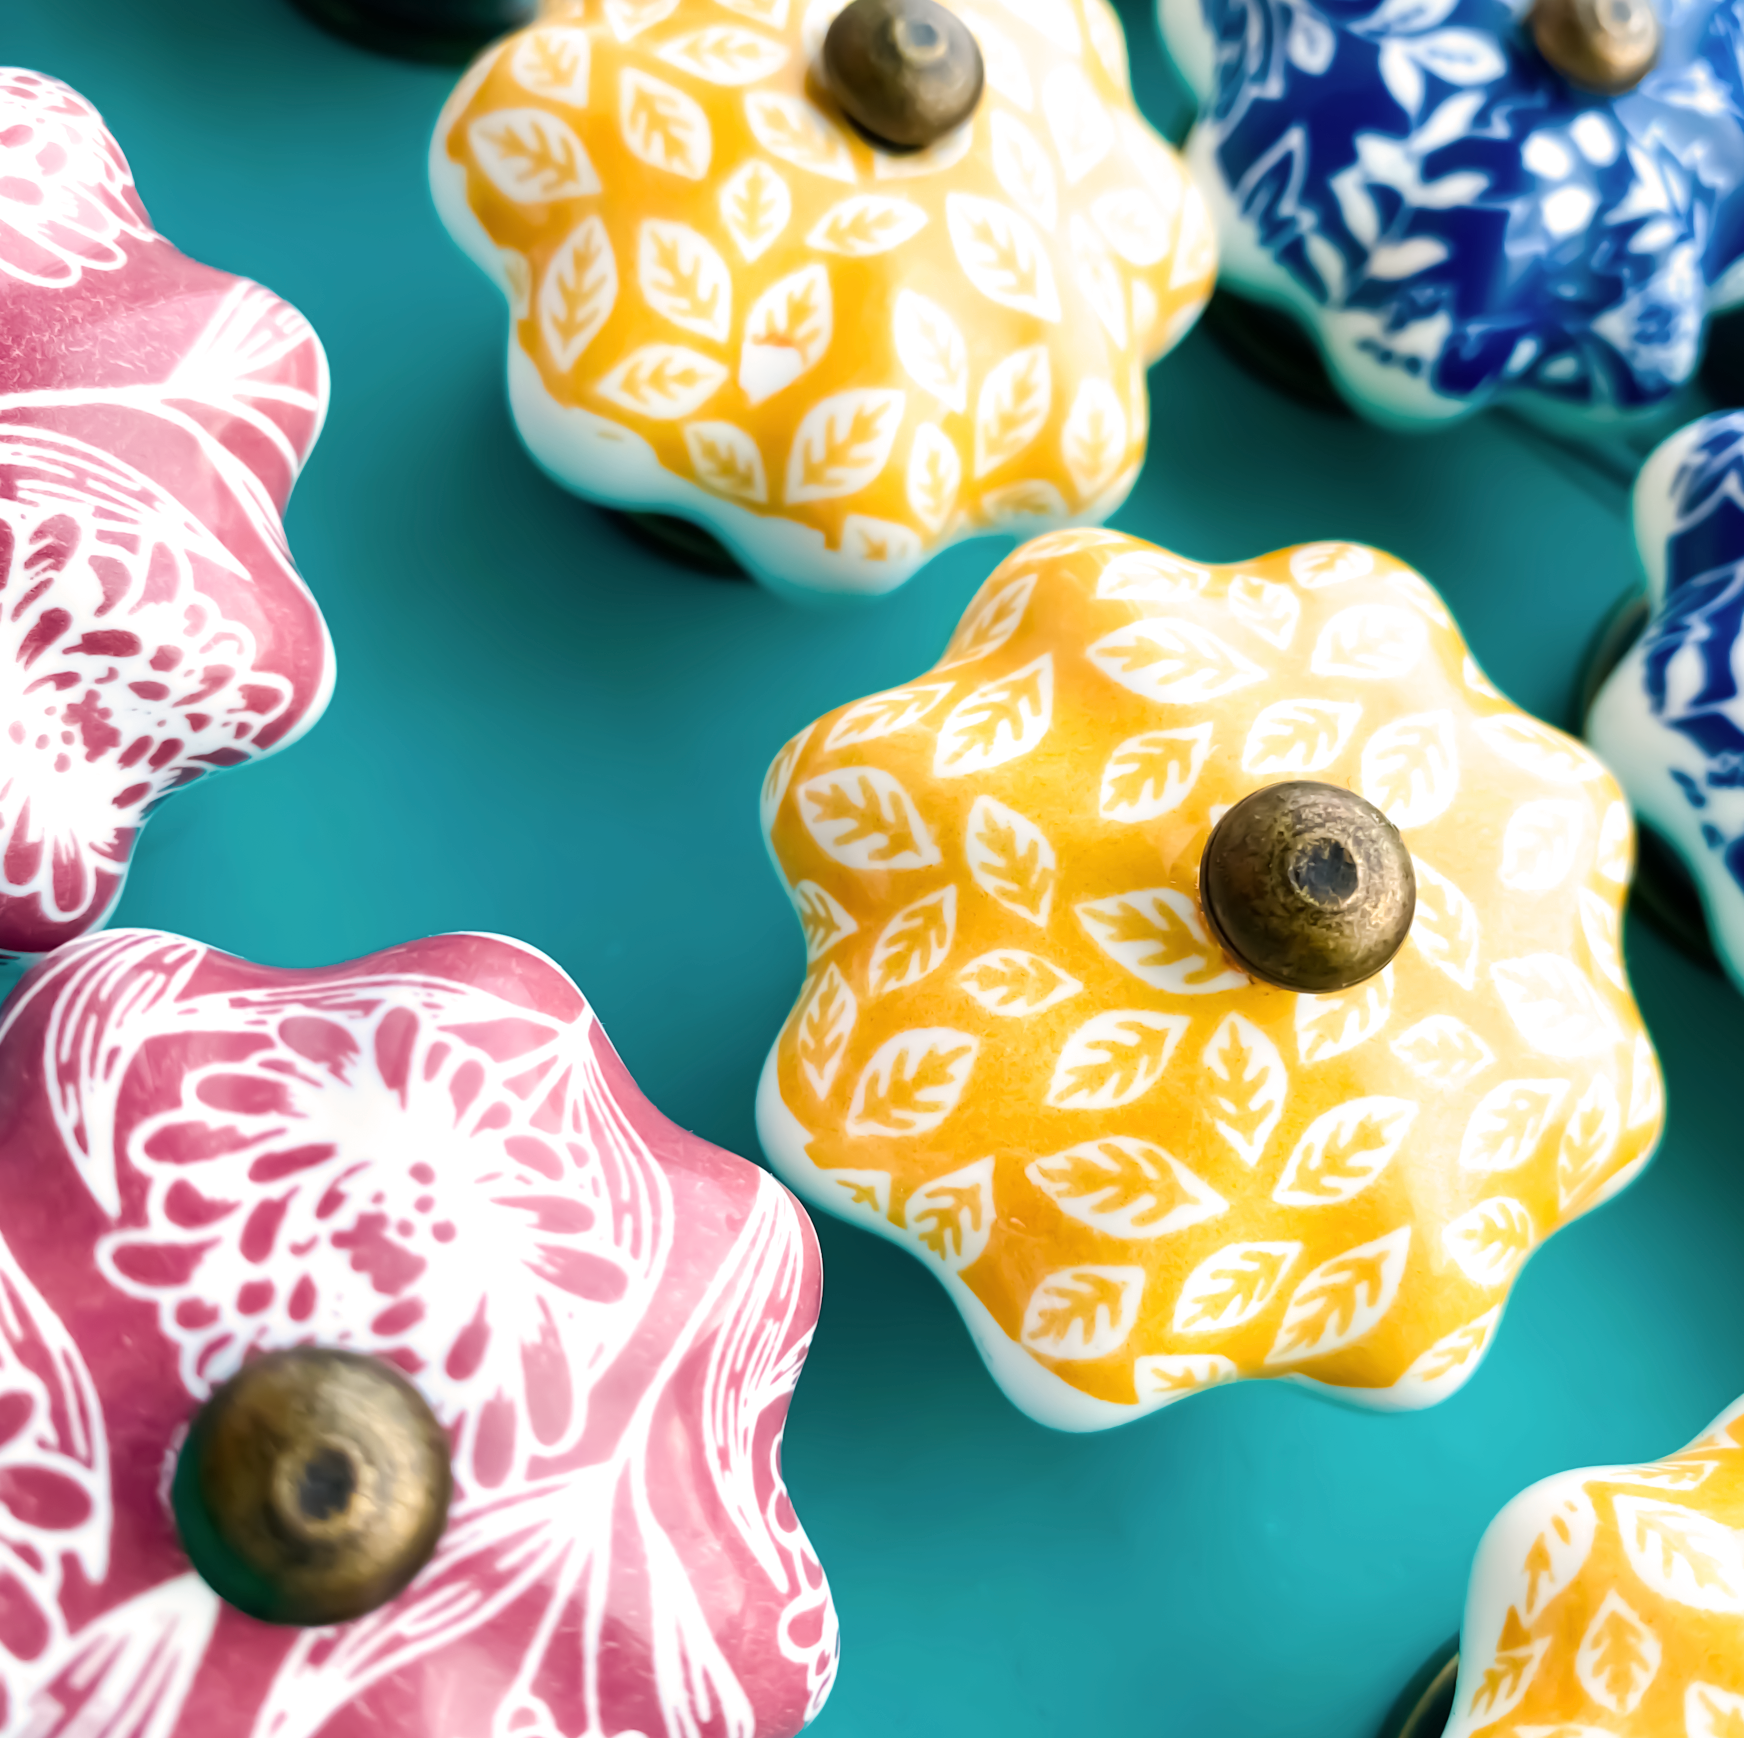 Assorted Floral Quilted Drawer Knobs